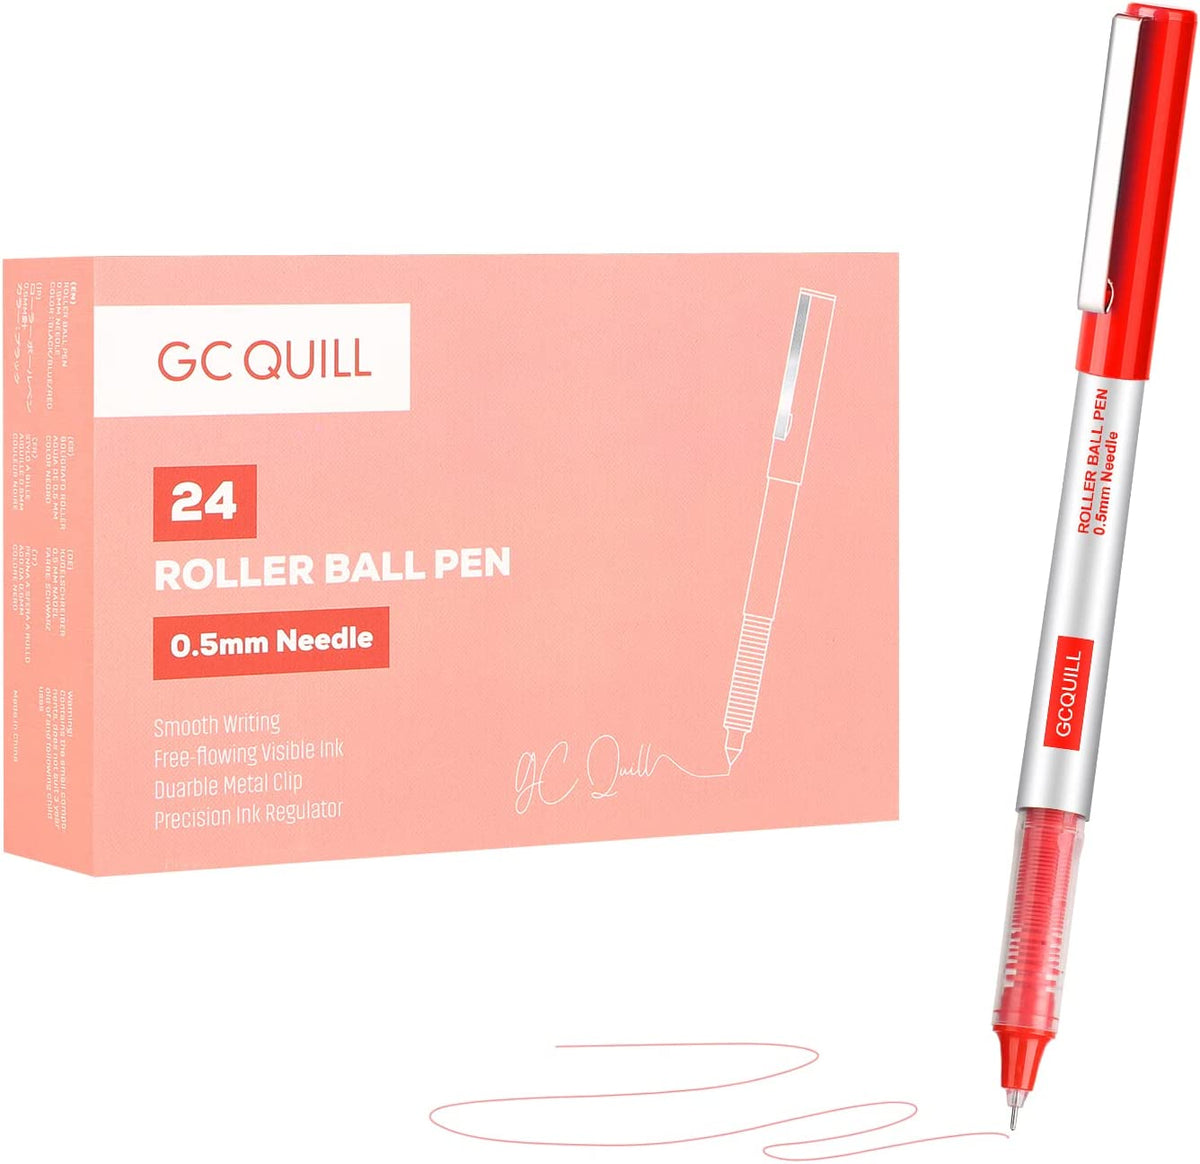 Red Rollerball Pens, Pack of 24, 0.5mm Red Liquid Ink Pens for Bullet Journaling, Fine Point Rollerball, Office Supplies for Writing, Taking Notes & Sketching RD24